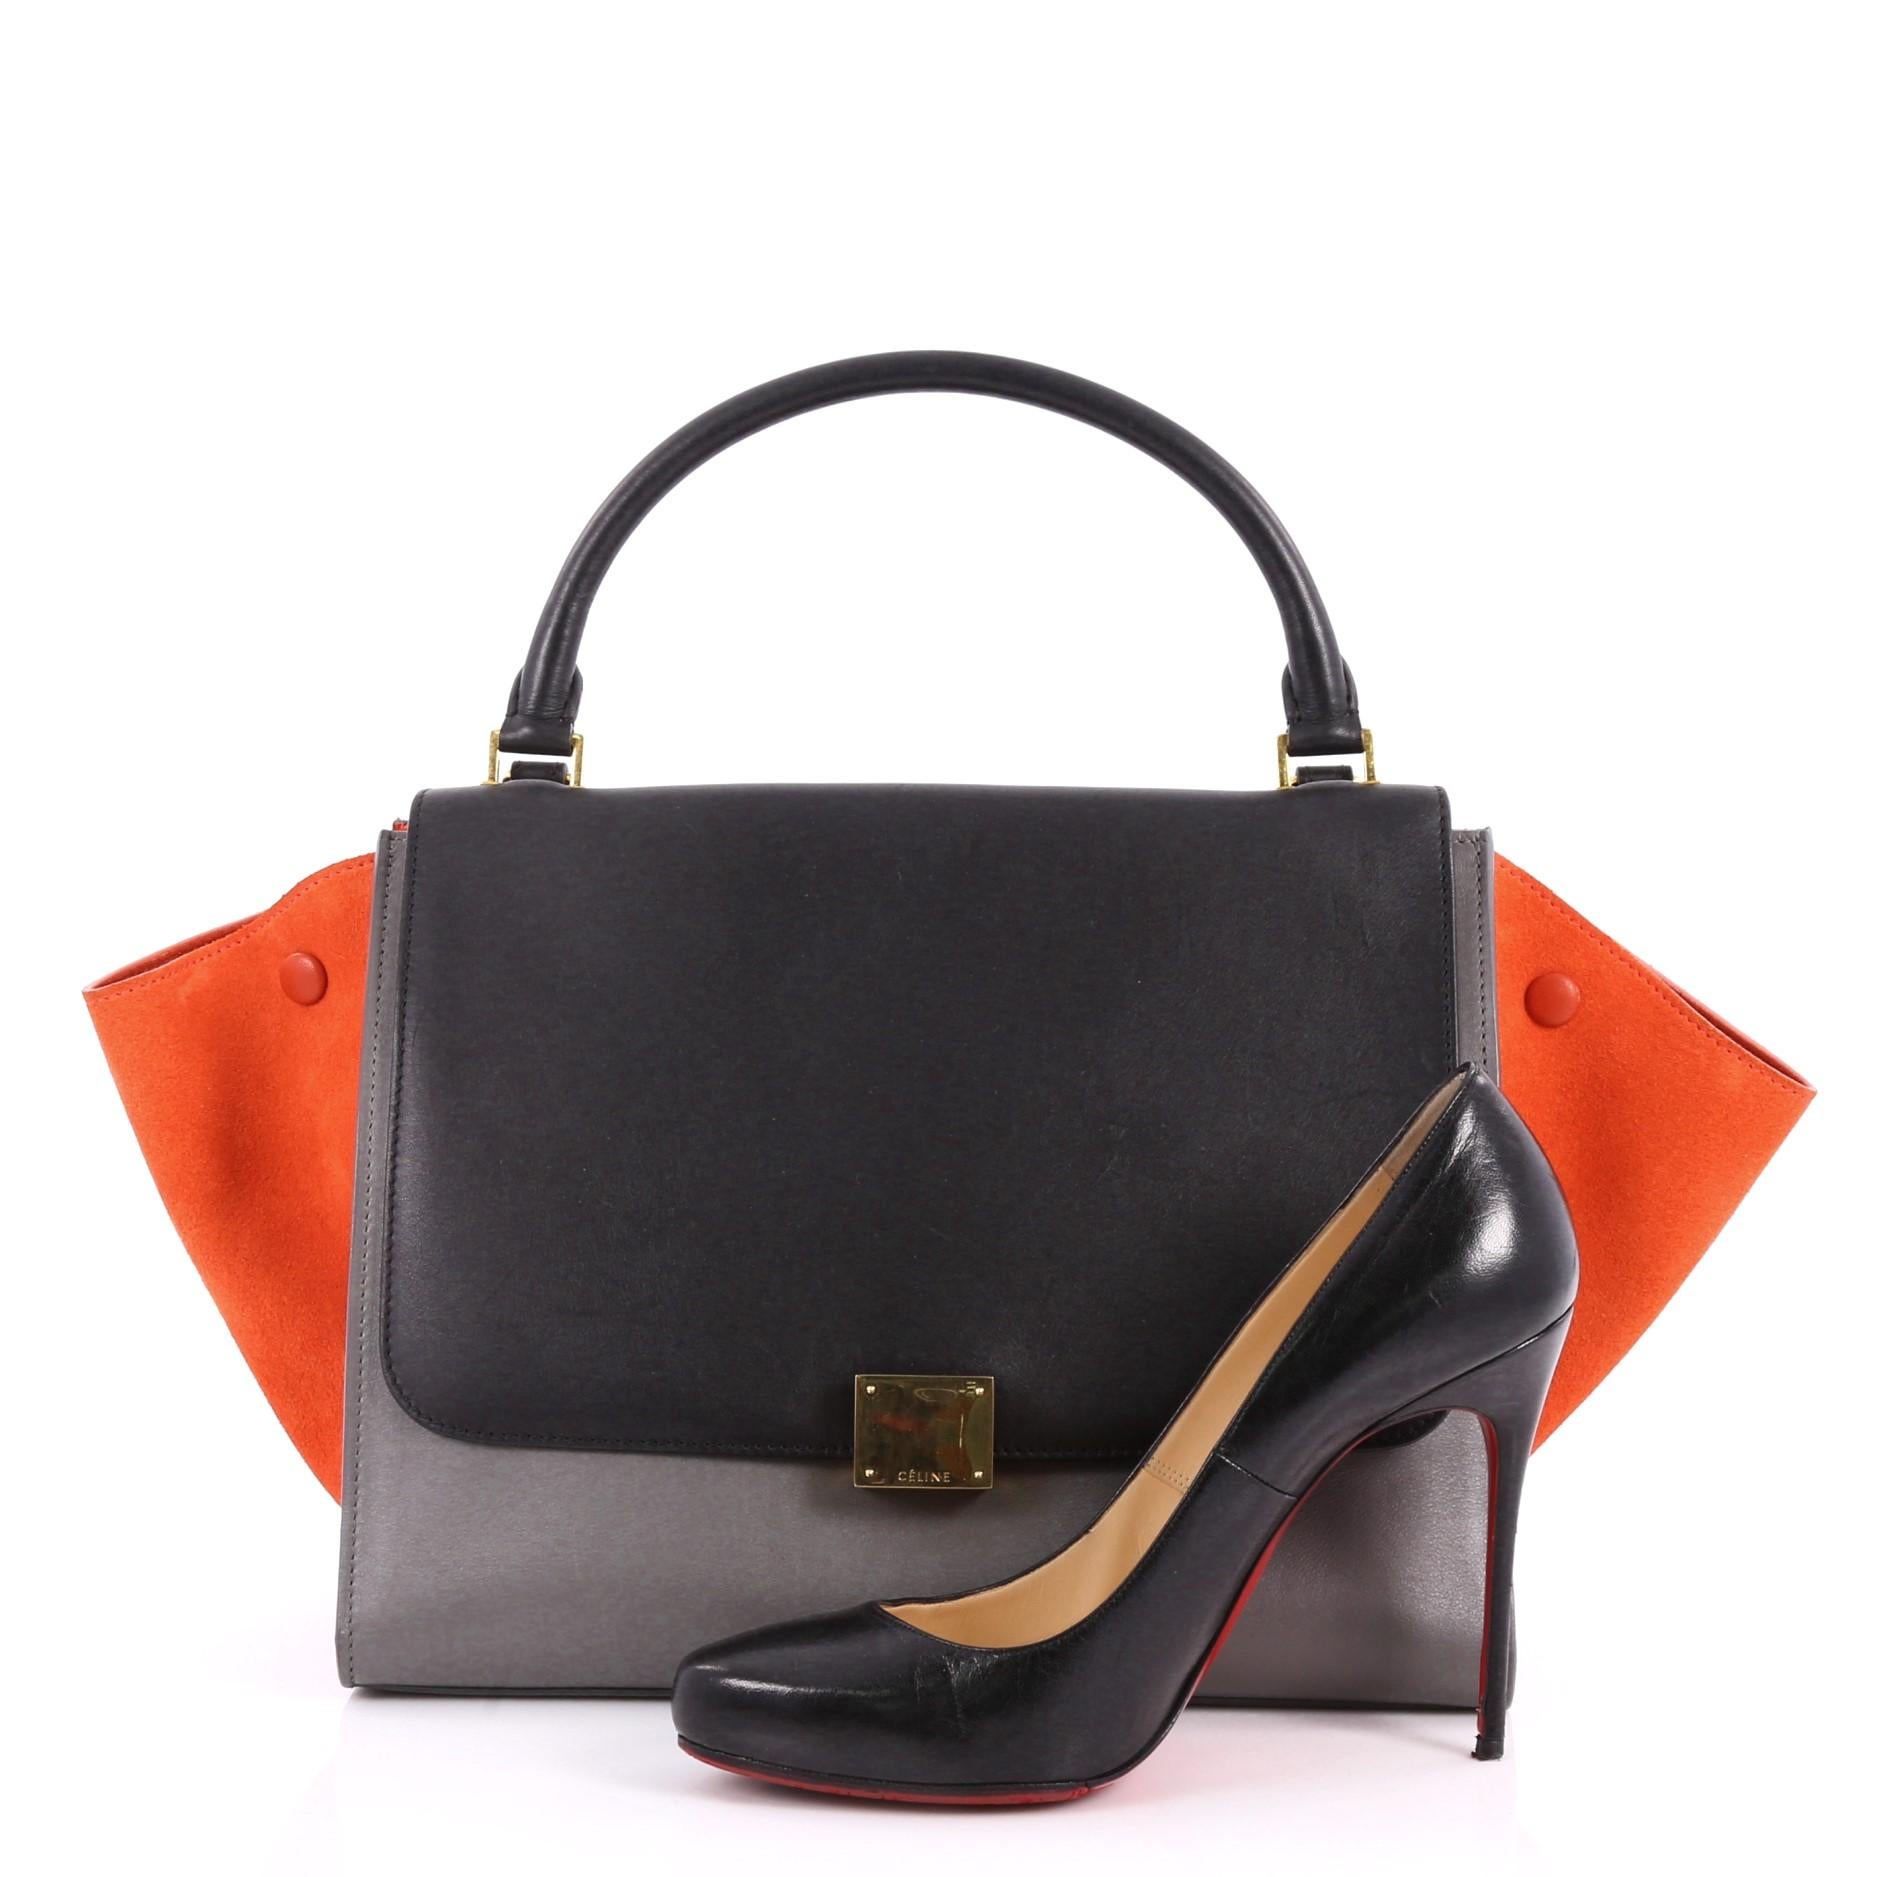 This authentic Celine Tricolor Trapeze Handbag Leather Medium is a modern minimalist design with a playful twist in an array of subdued colors. Crafted from black and gray leather and orange suede wings, this classic satchel features gold-tone